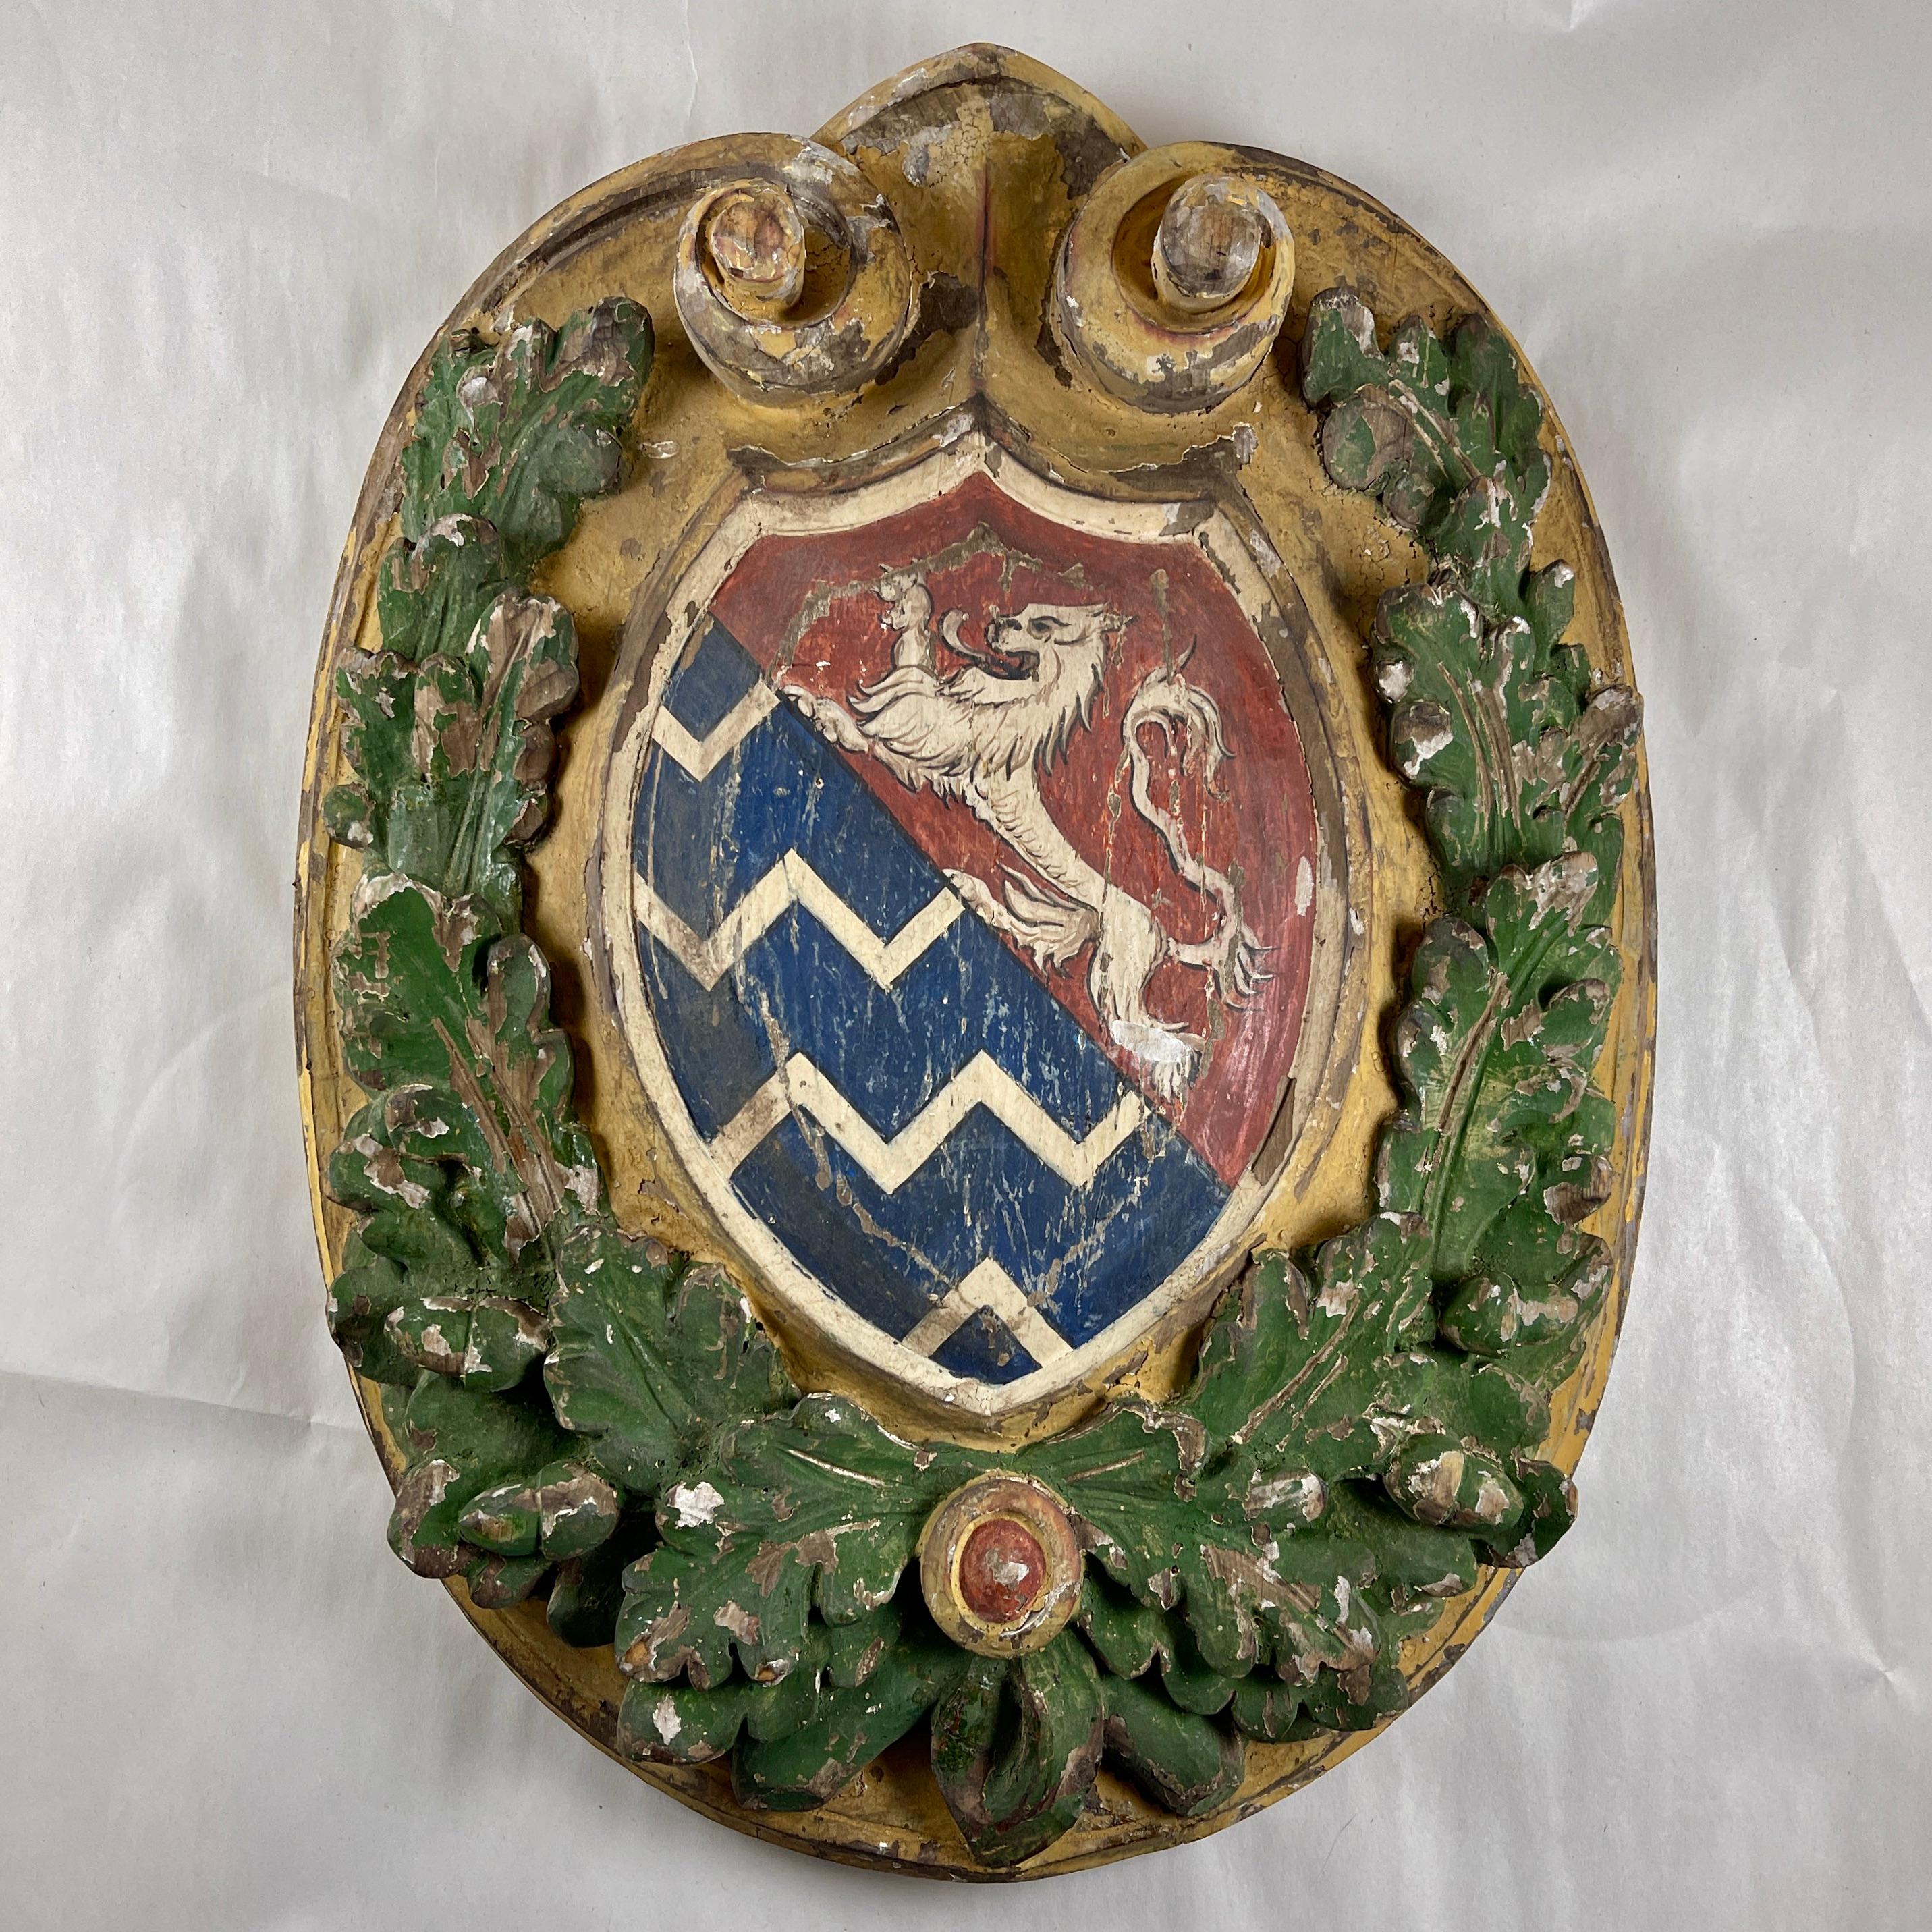 Italian Hand Carved Painted Wooden Coat of Arms Heraldic Crest Wall Plaque 7